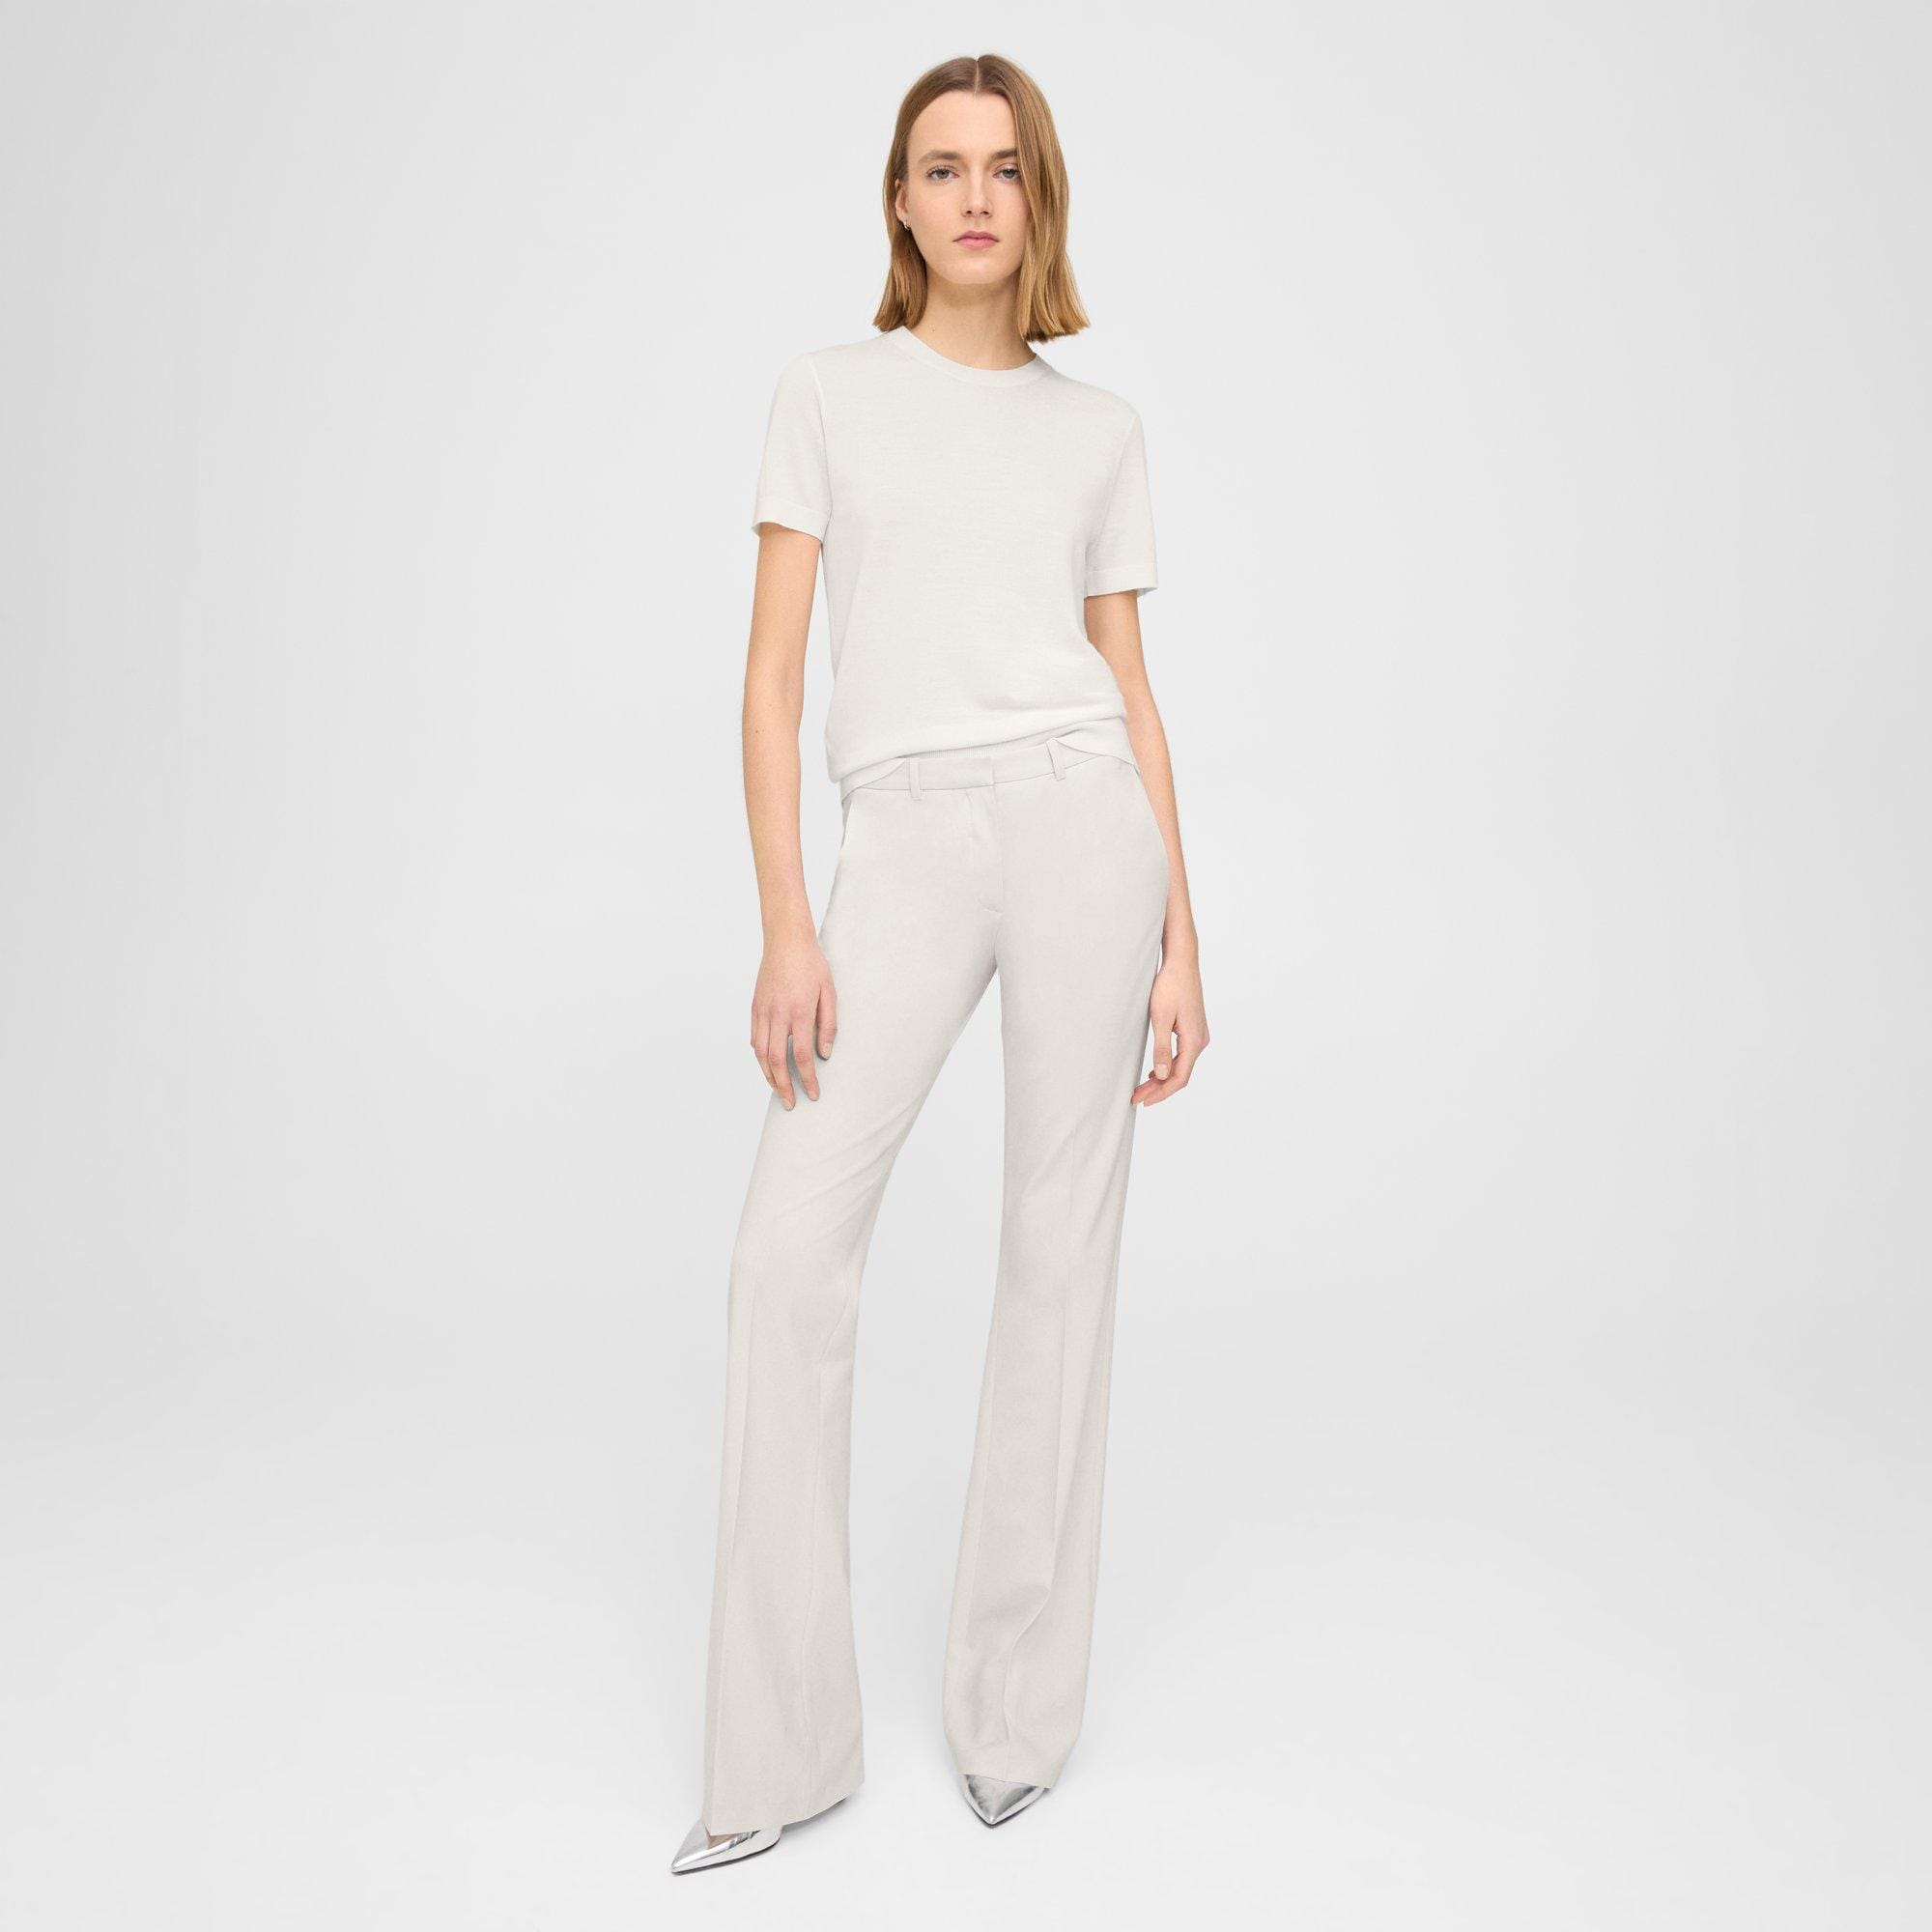 Theory Demitria Good Wool Suiting Pants